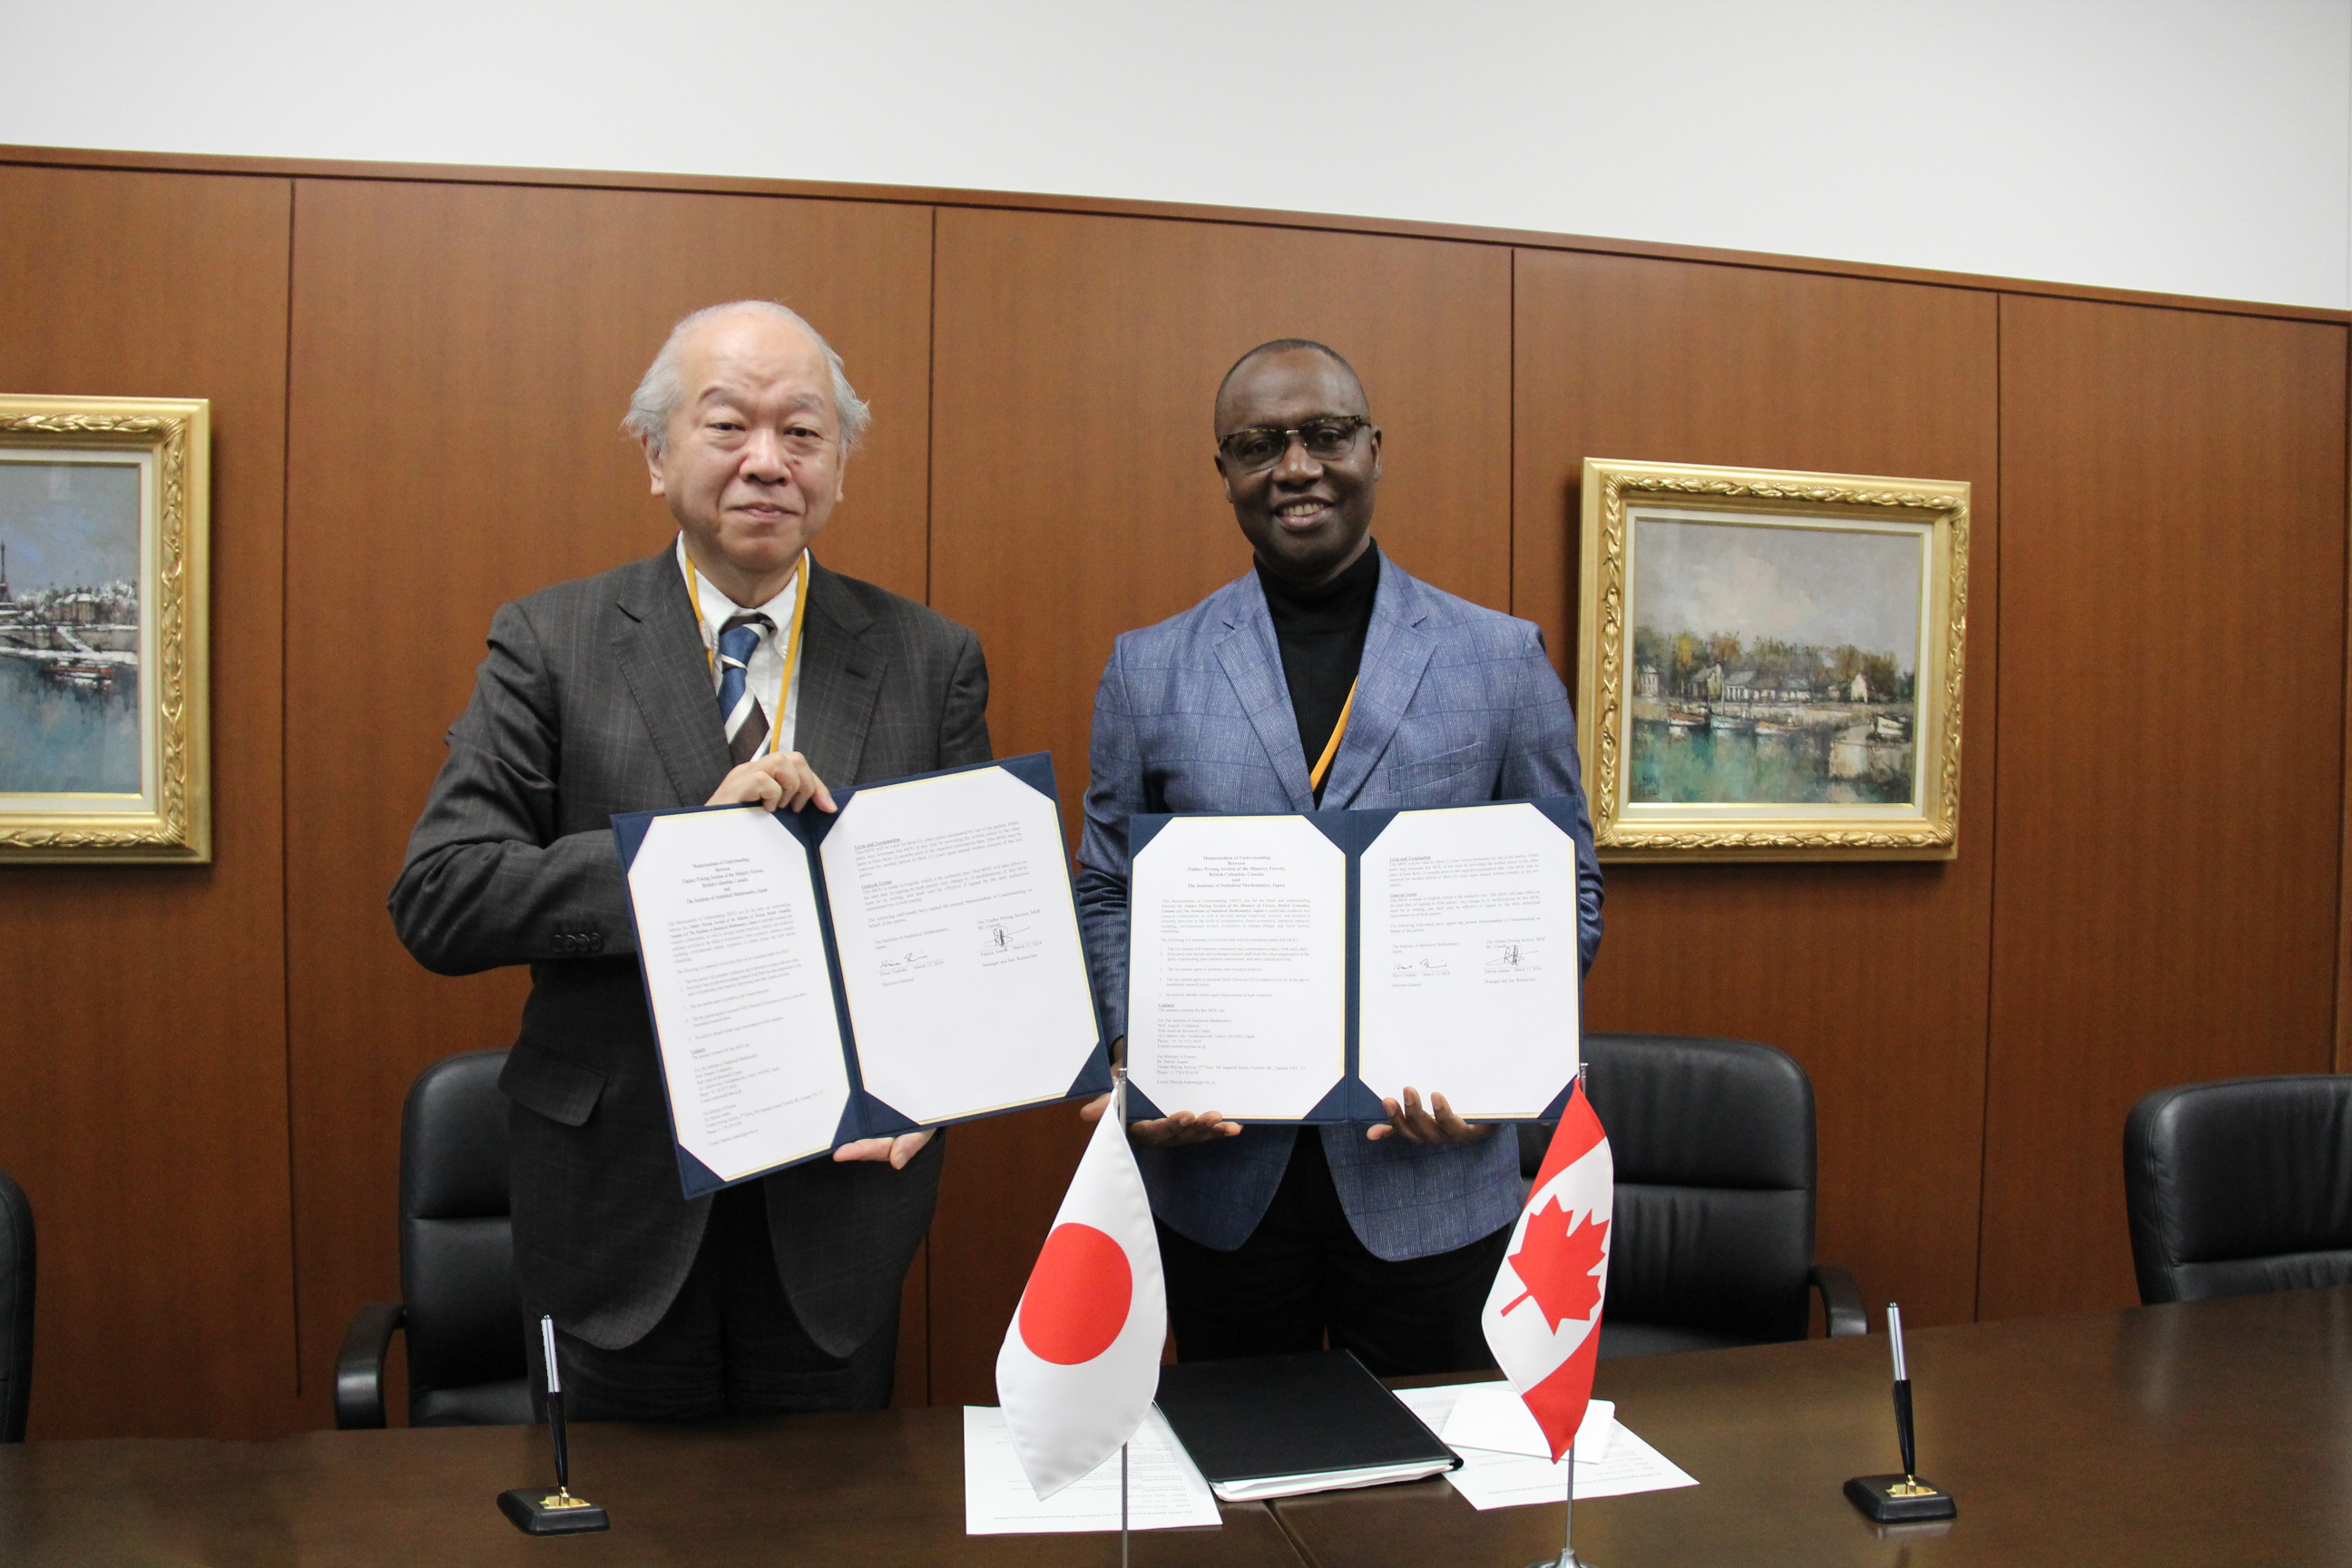 Prof. Tsubaki, Director-General and Dr. Asante (from Canada) signed the MOU.